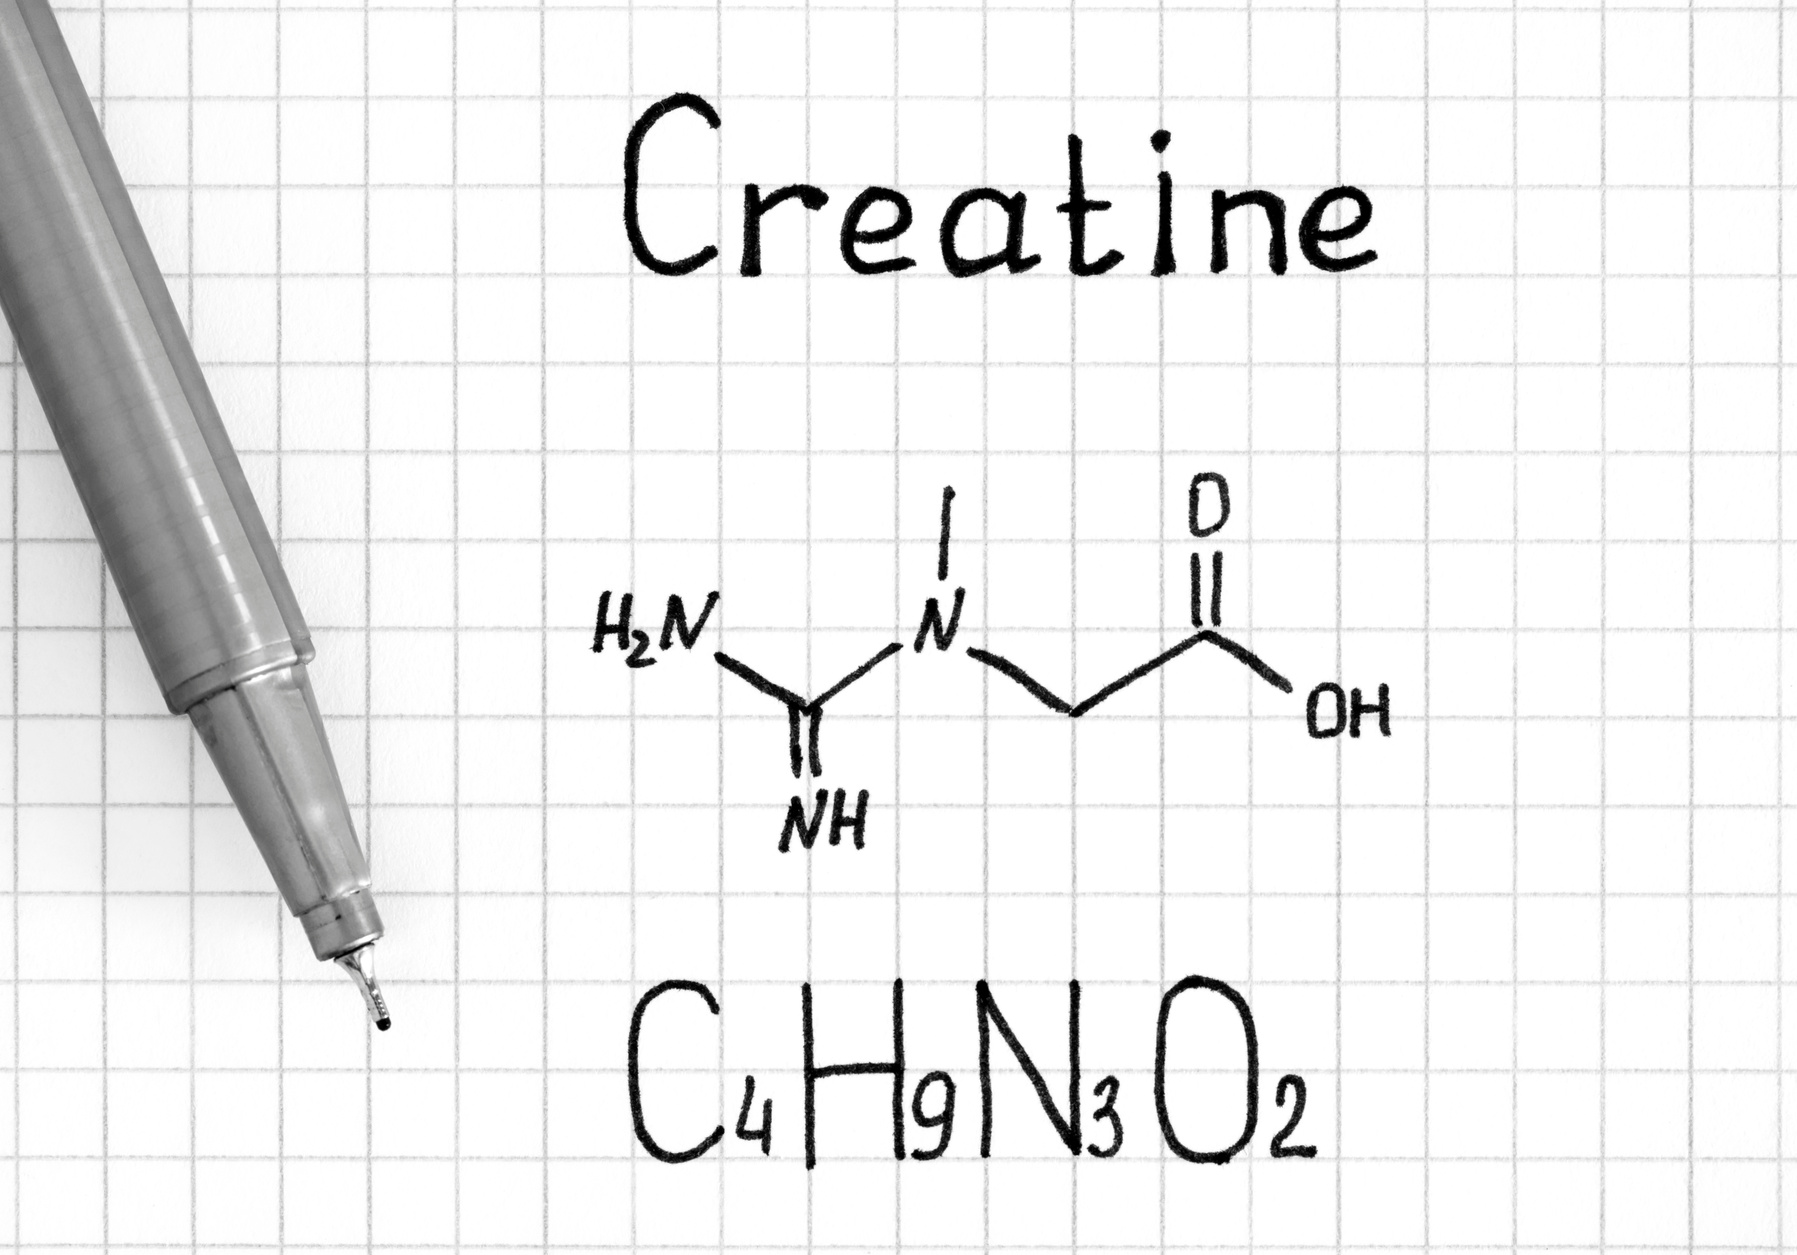 Chemical formula of Creatine with pen.